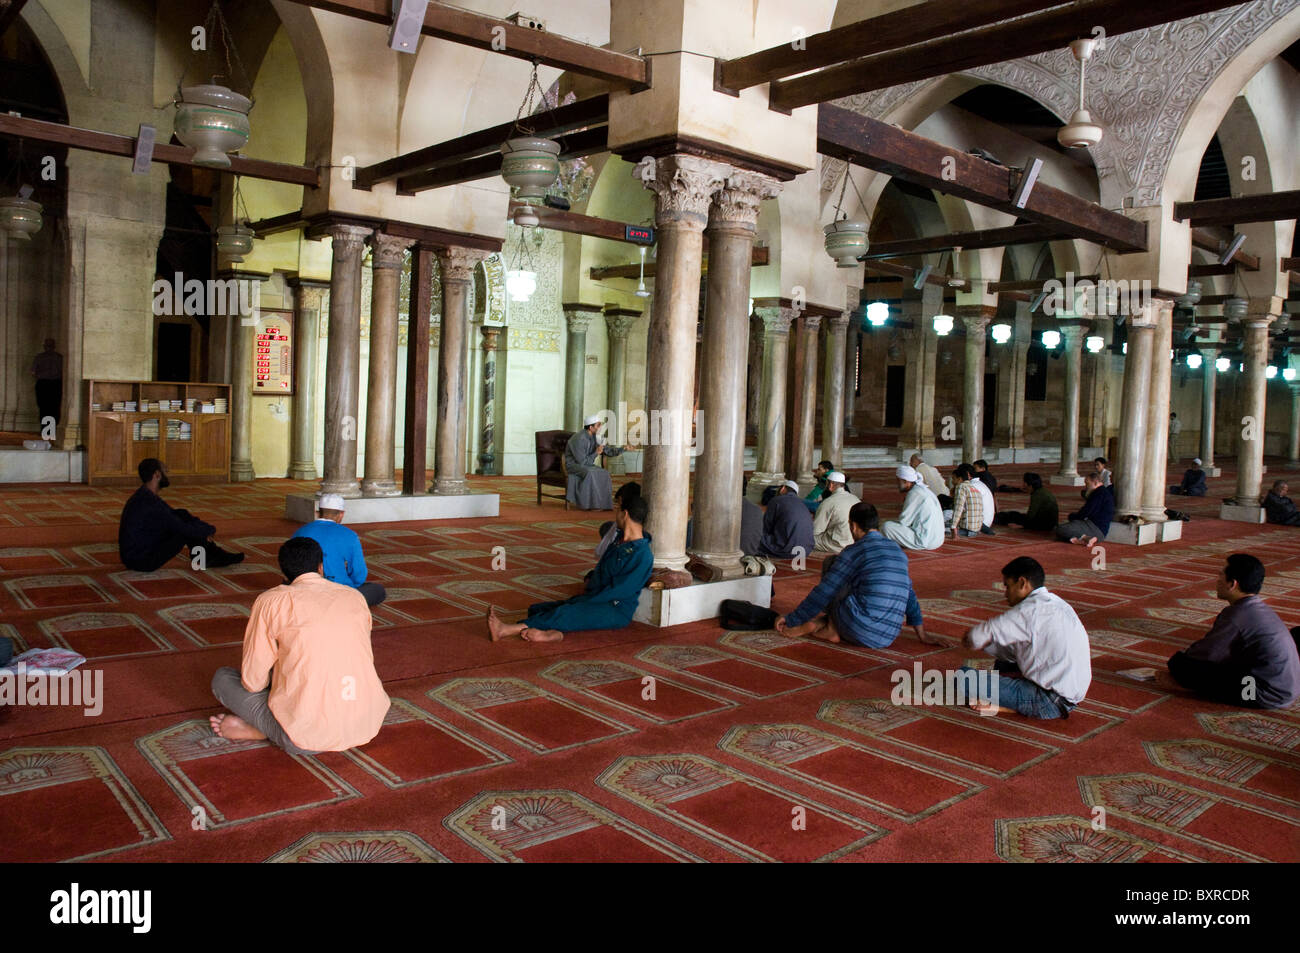 Egypt. The restful interior of the al-Azhar Mosque in Cairo. This is also a center of learning. Stock Photo